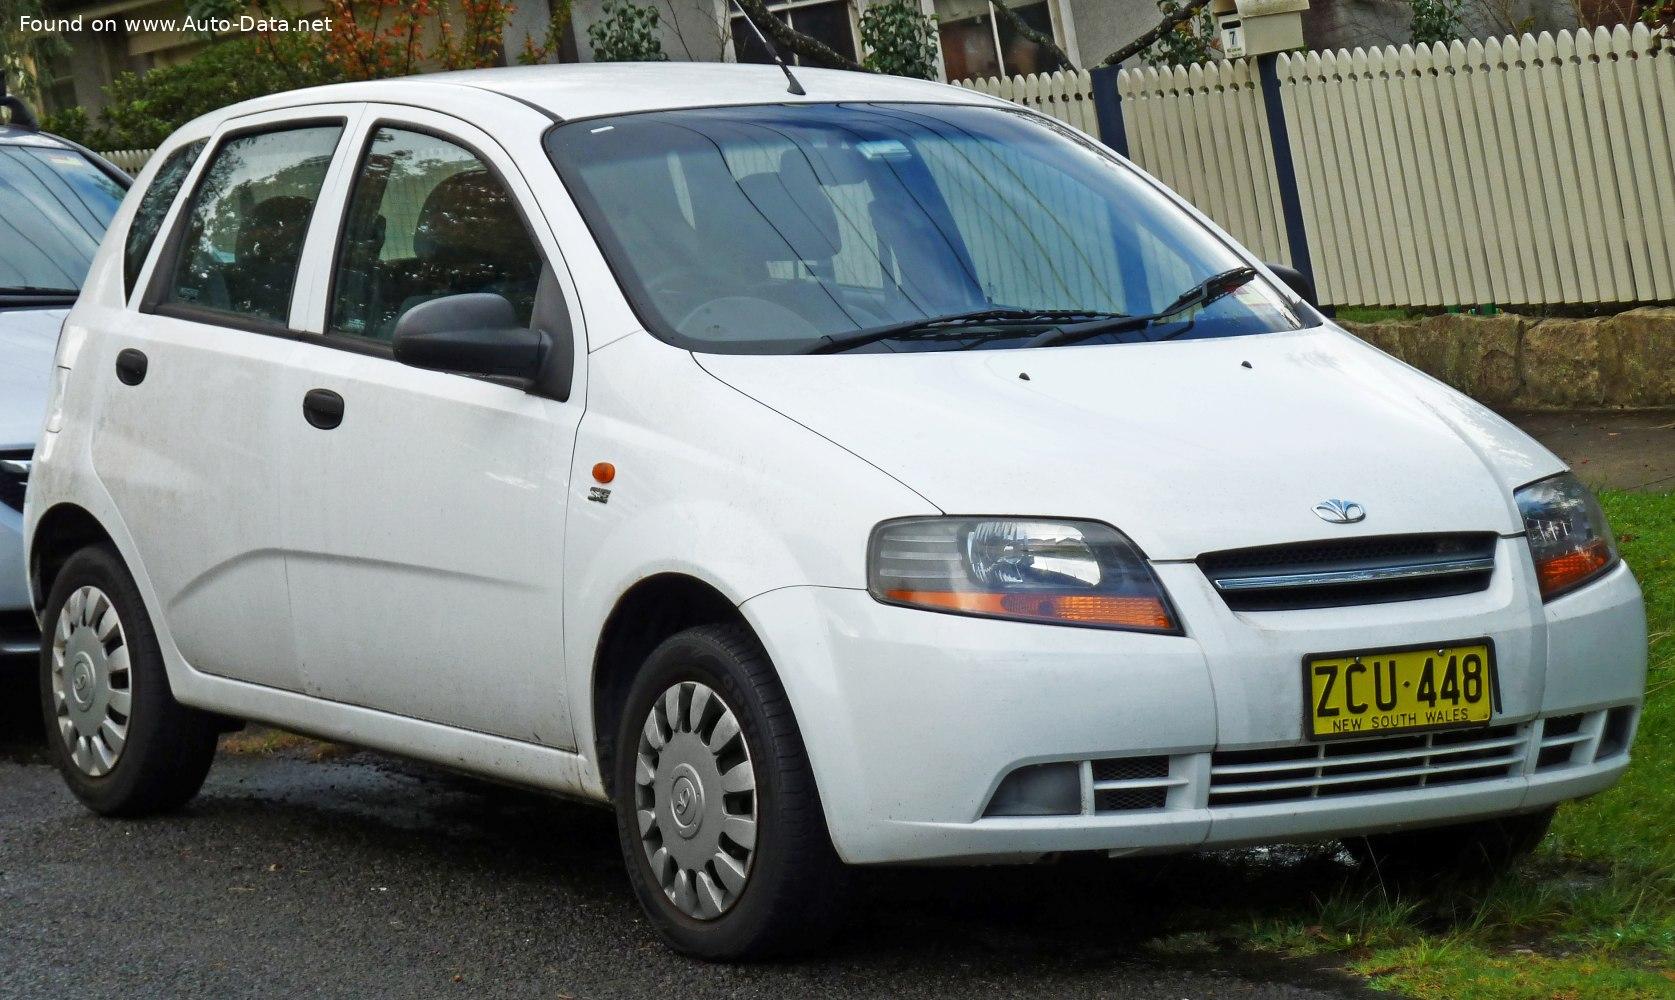 Picture of Daewoo Kalos